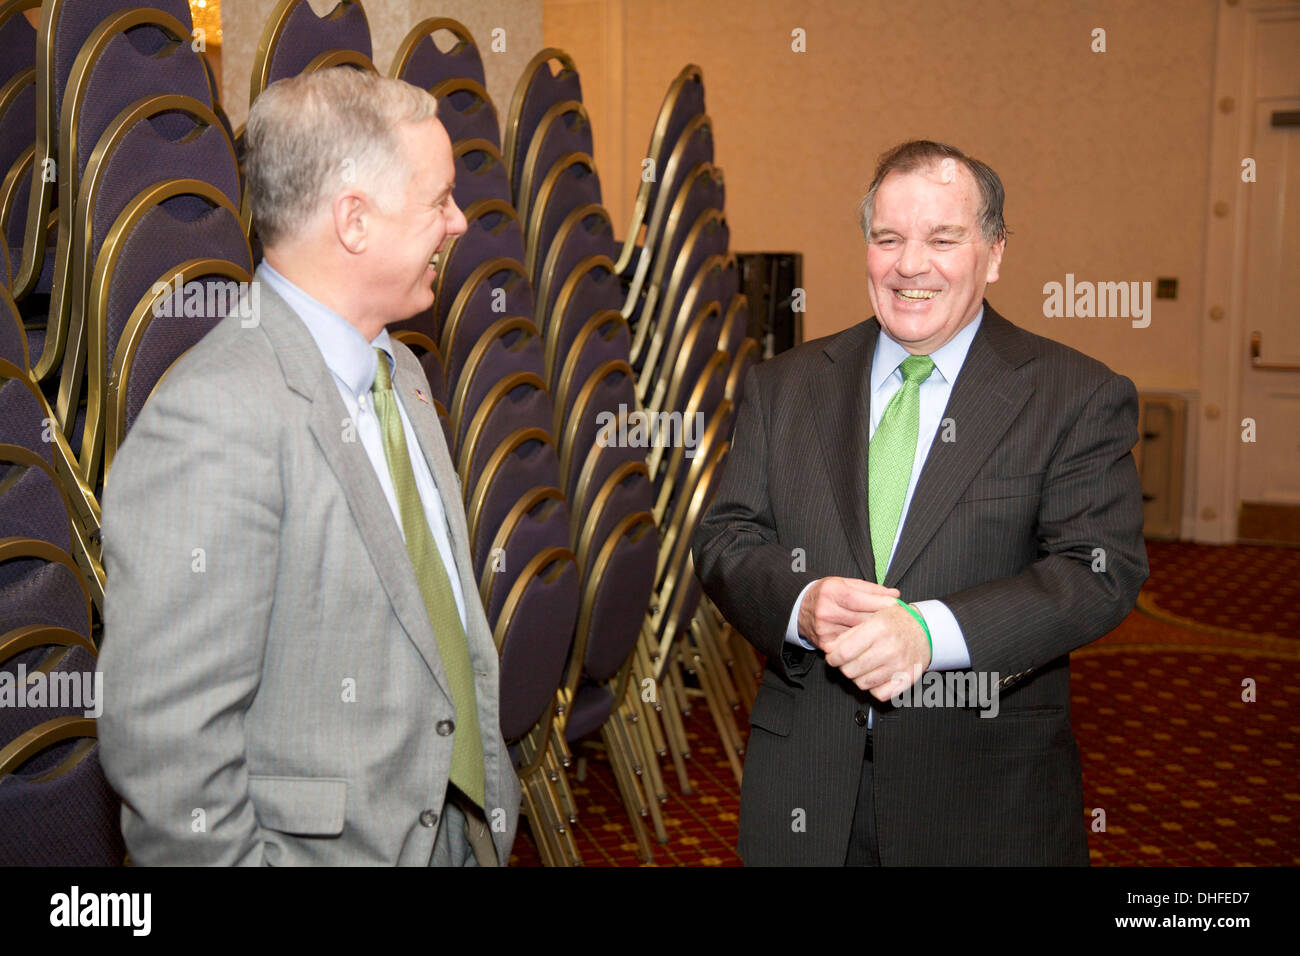 Chicago Mayor Richard M Daley and DNC Chairman Howard Dean share a laugh. March 2007 Chicago Hilton and Towers Hotel. Stock Photo